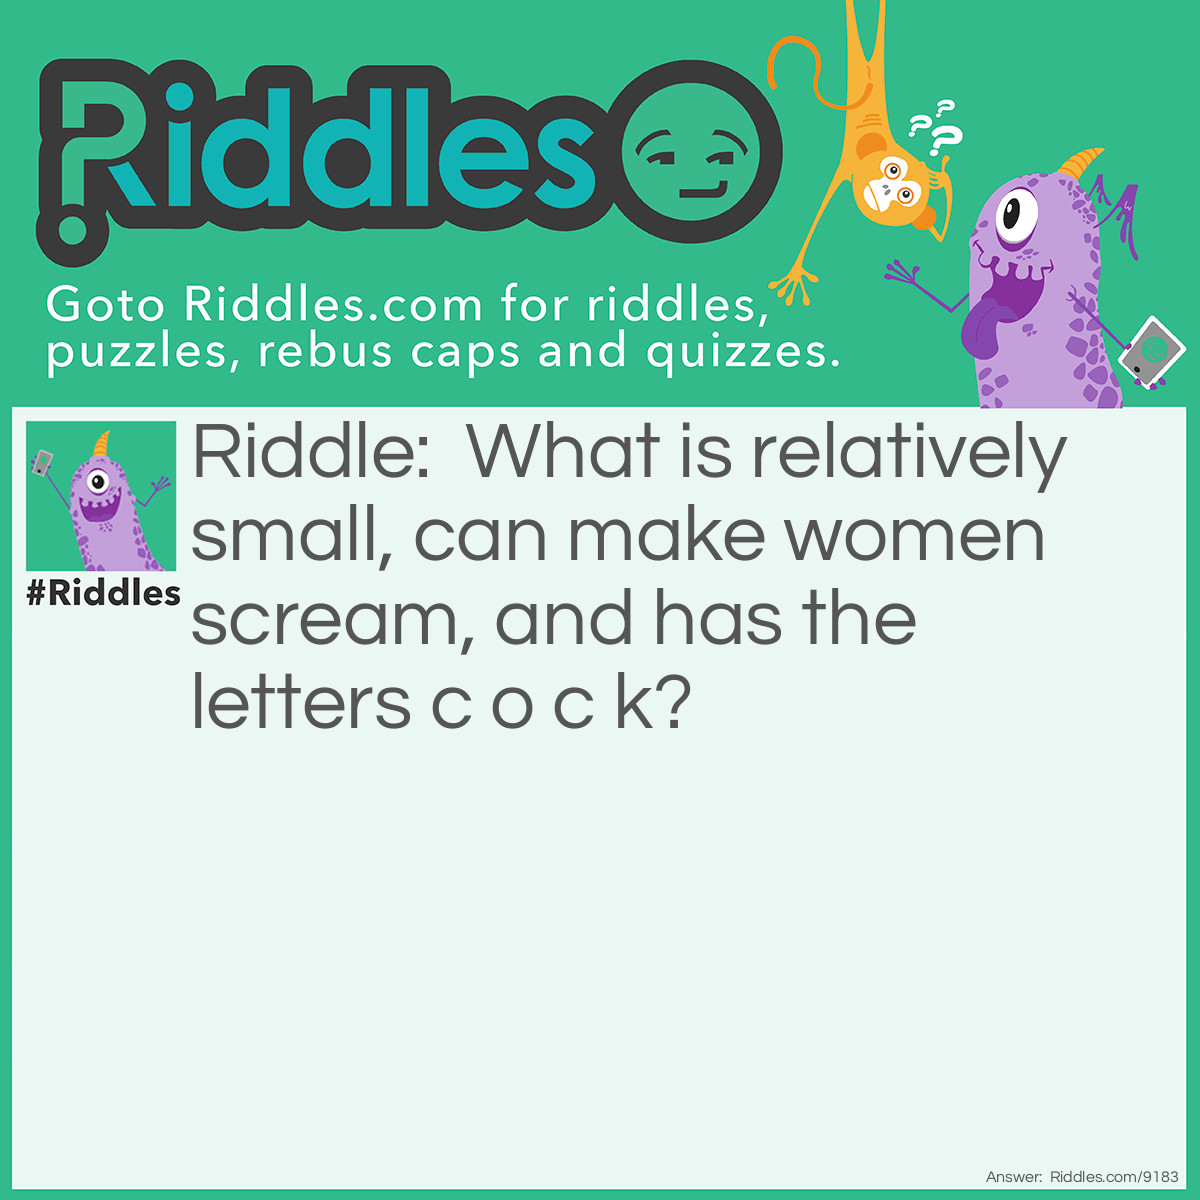 Riddle: What is relatively small, can make women scream, and has the letters c o c k? Answer: A cockroach.